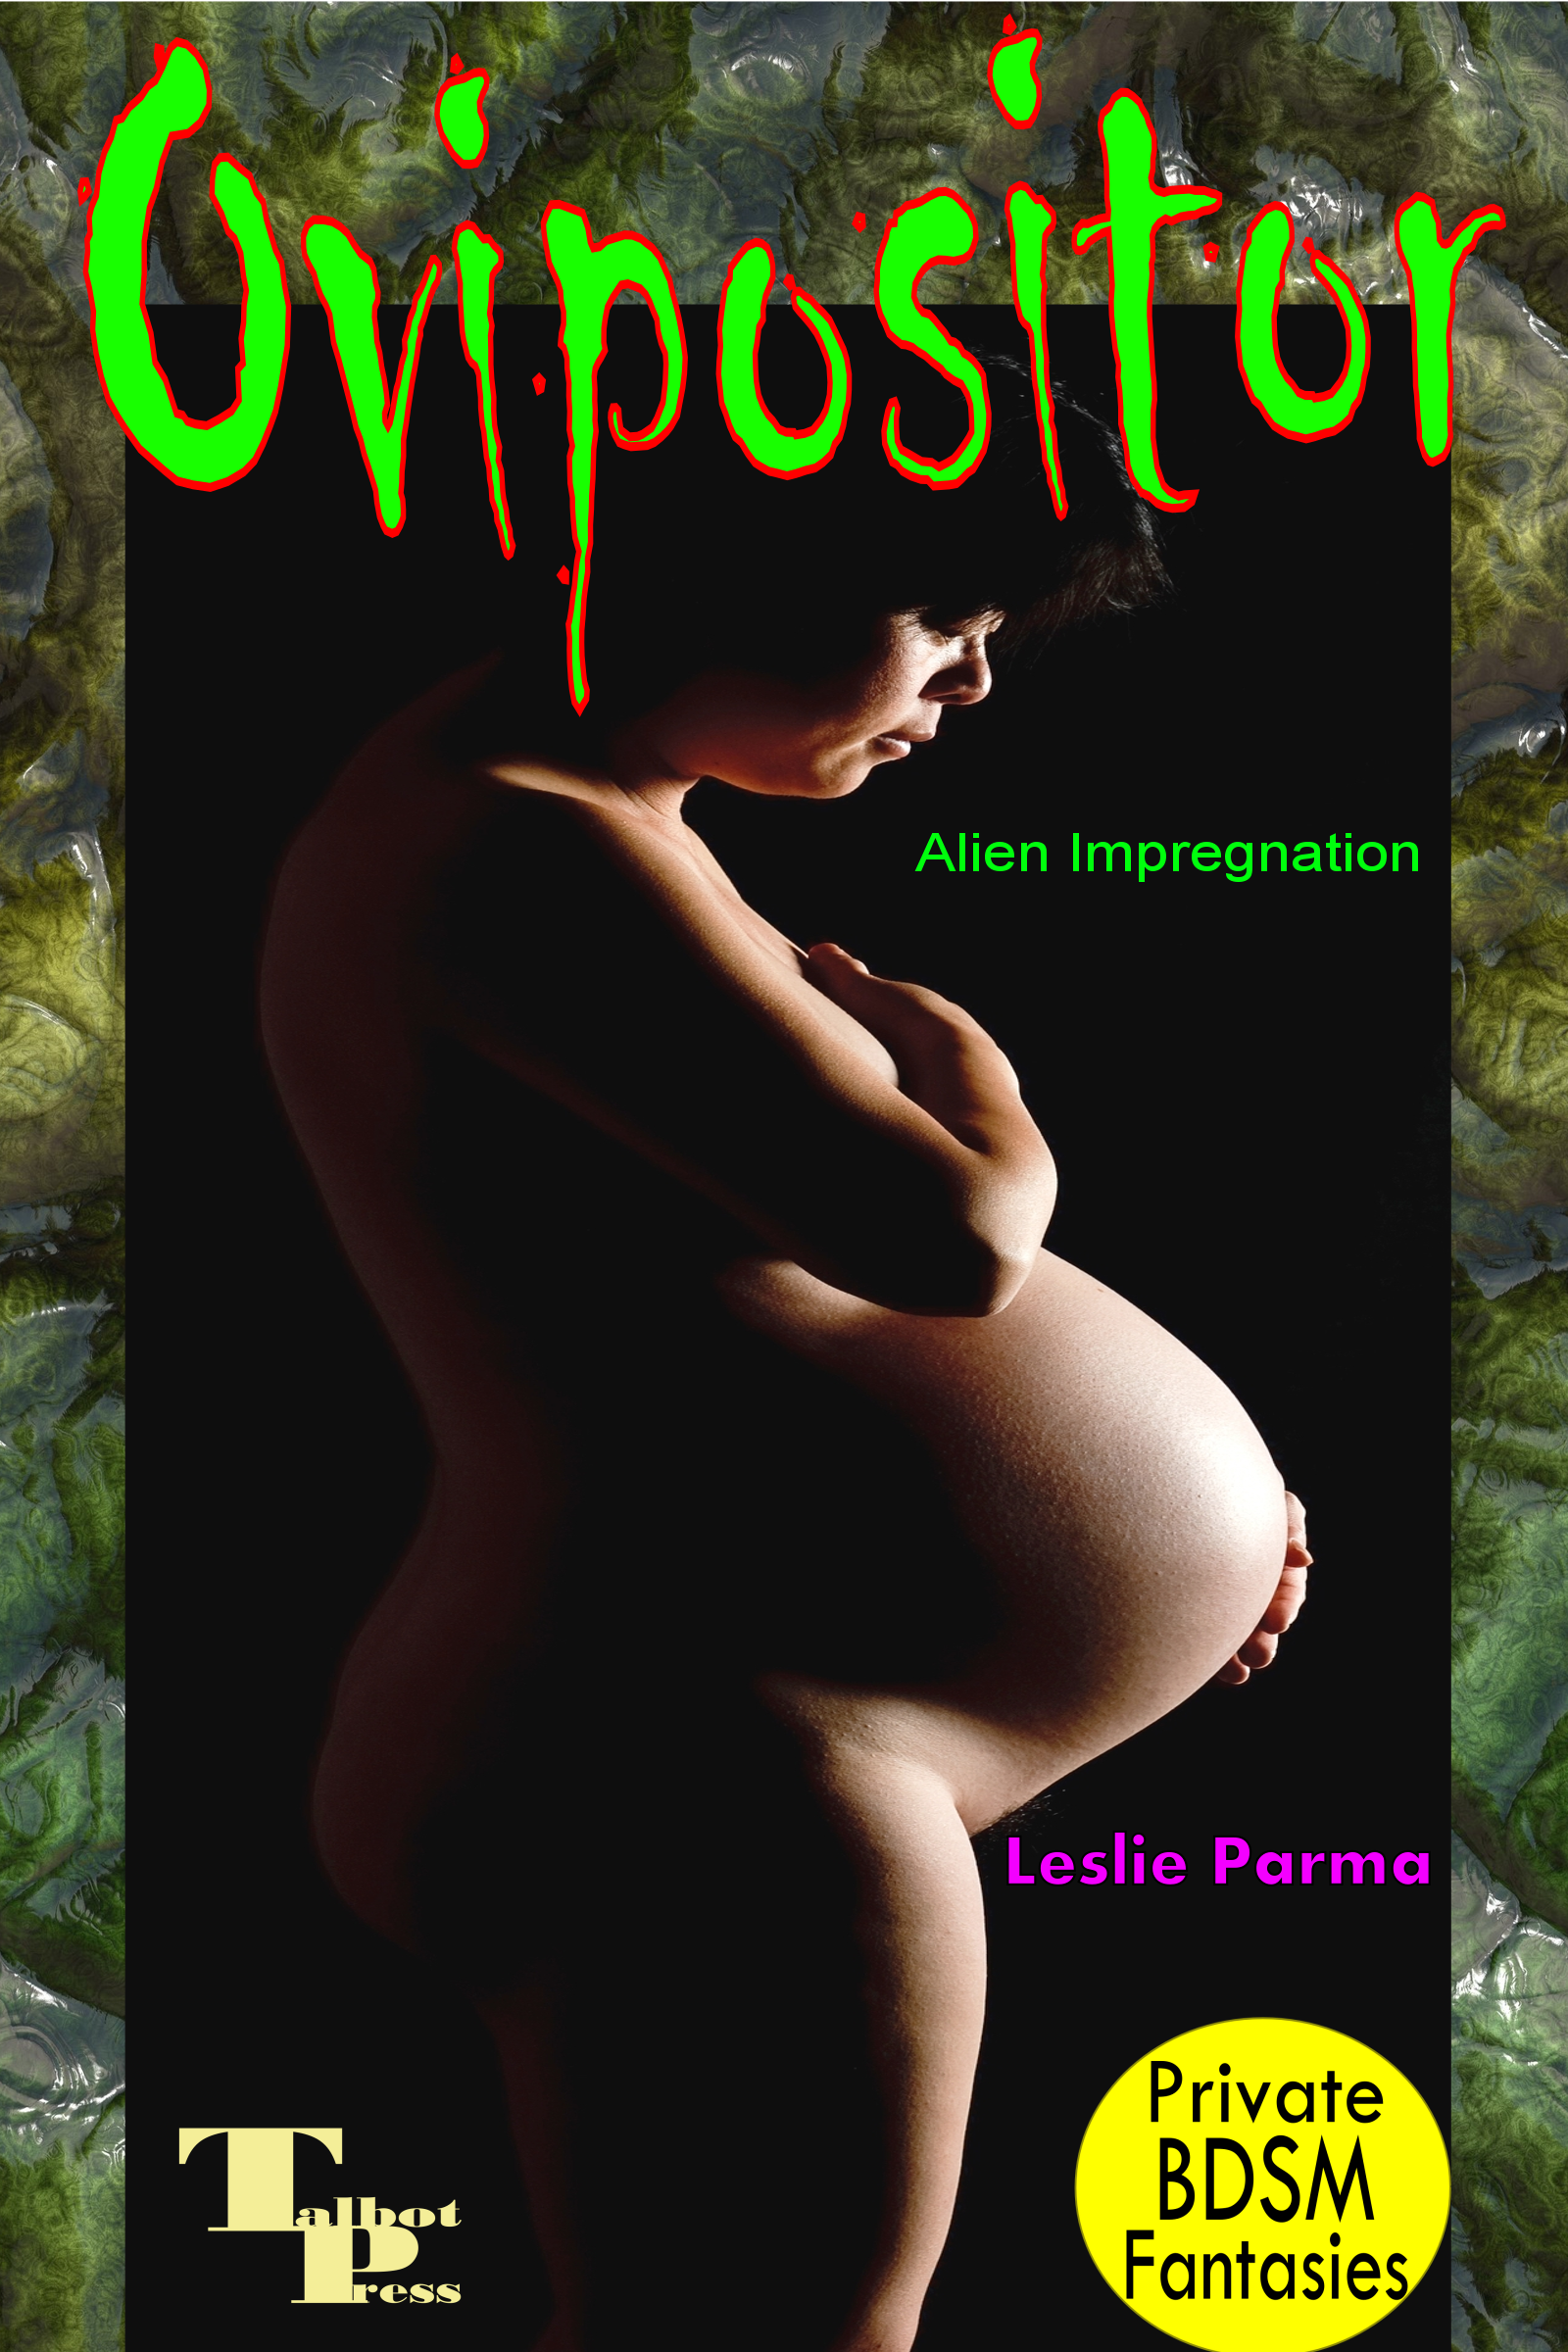 Dr Carl 27 - Ovipositor, an Ebook by Leslie Parma